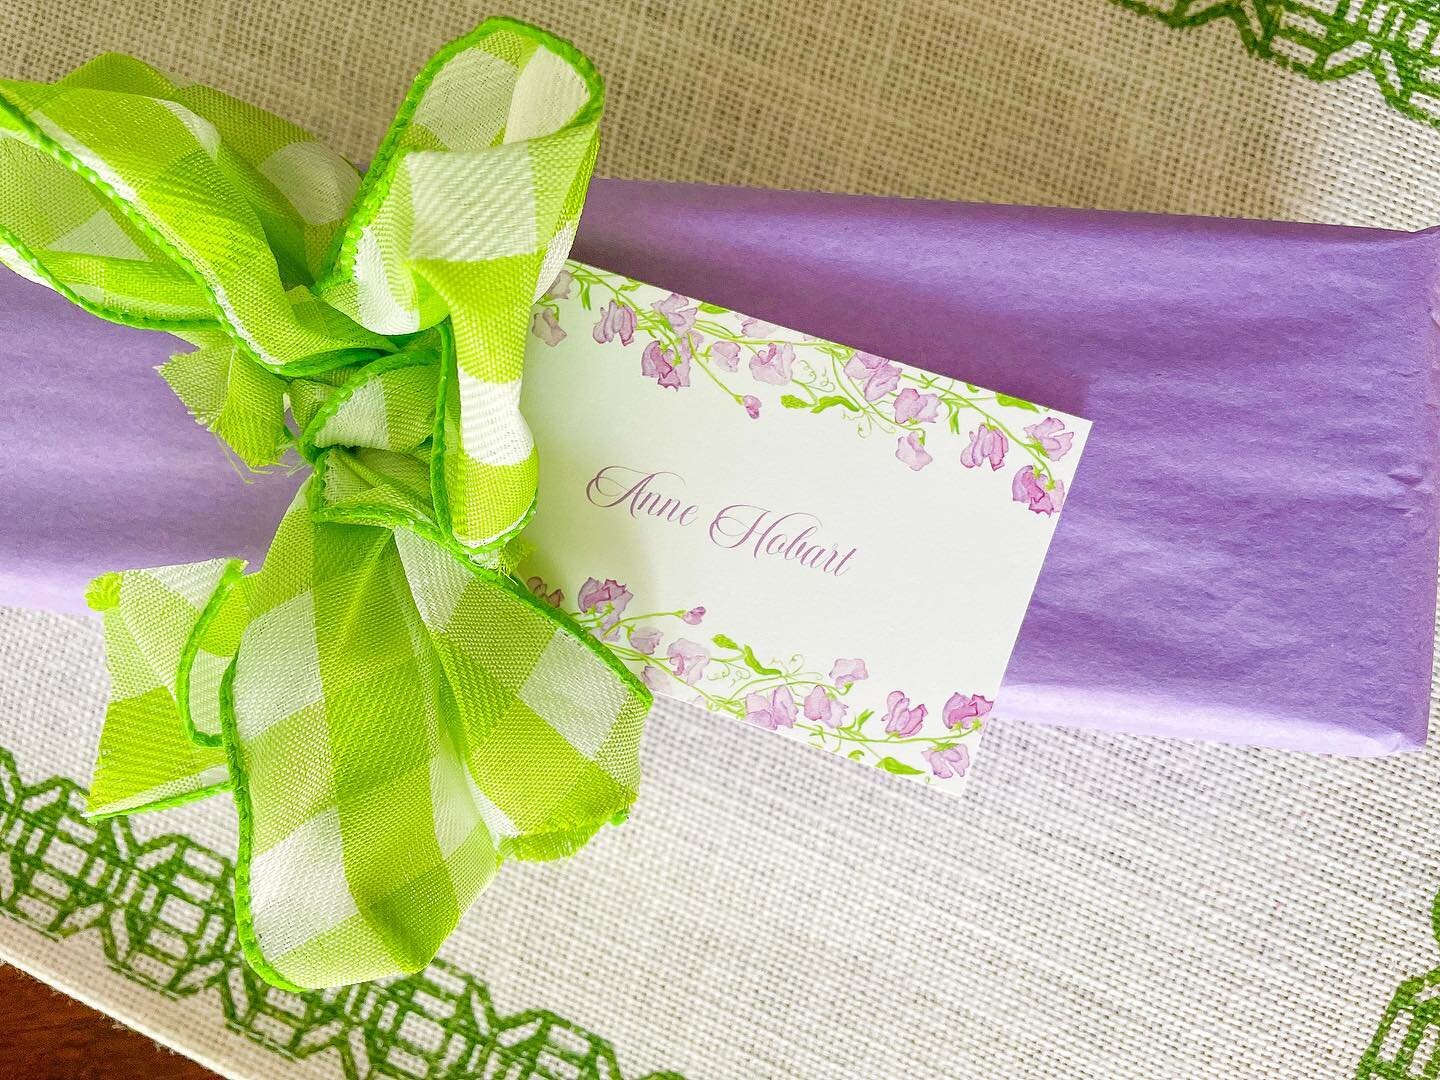 Pretty paper completes the perfect gift! 

#whitmorewatercolors #callingcards #gifttags #giftgiving